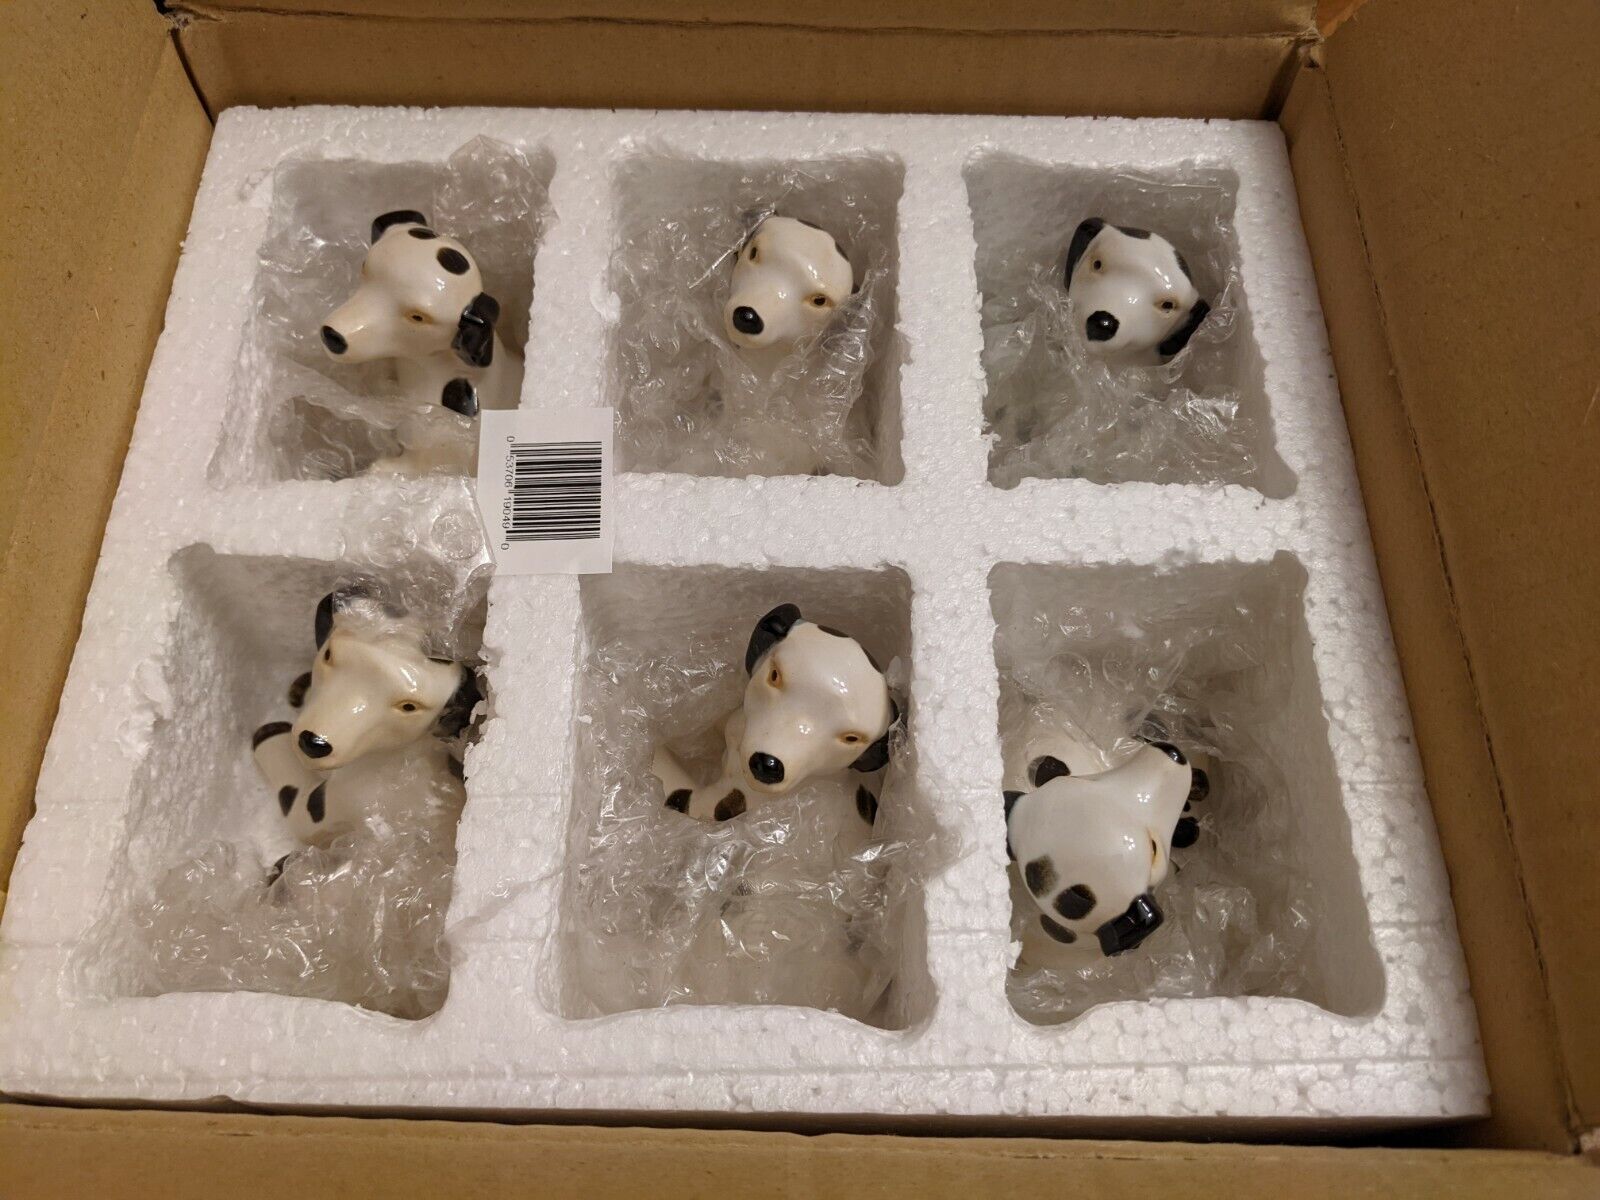 Andrea By Sadek 19049 Collectibles Set of 6 Dalmation Dog Figurines